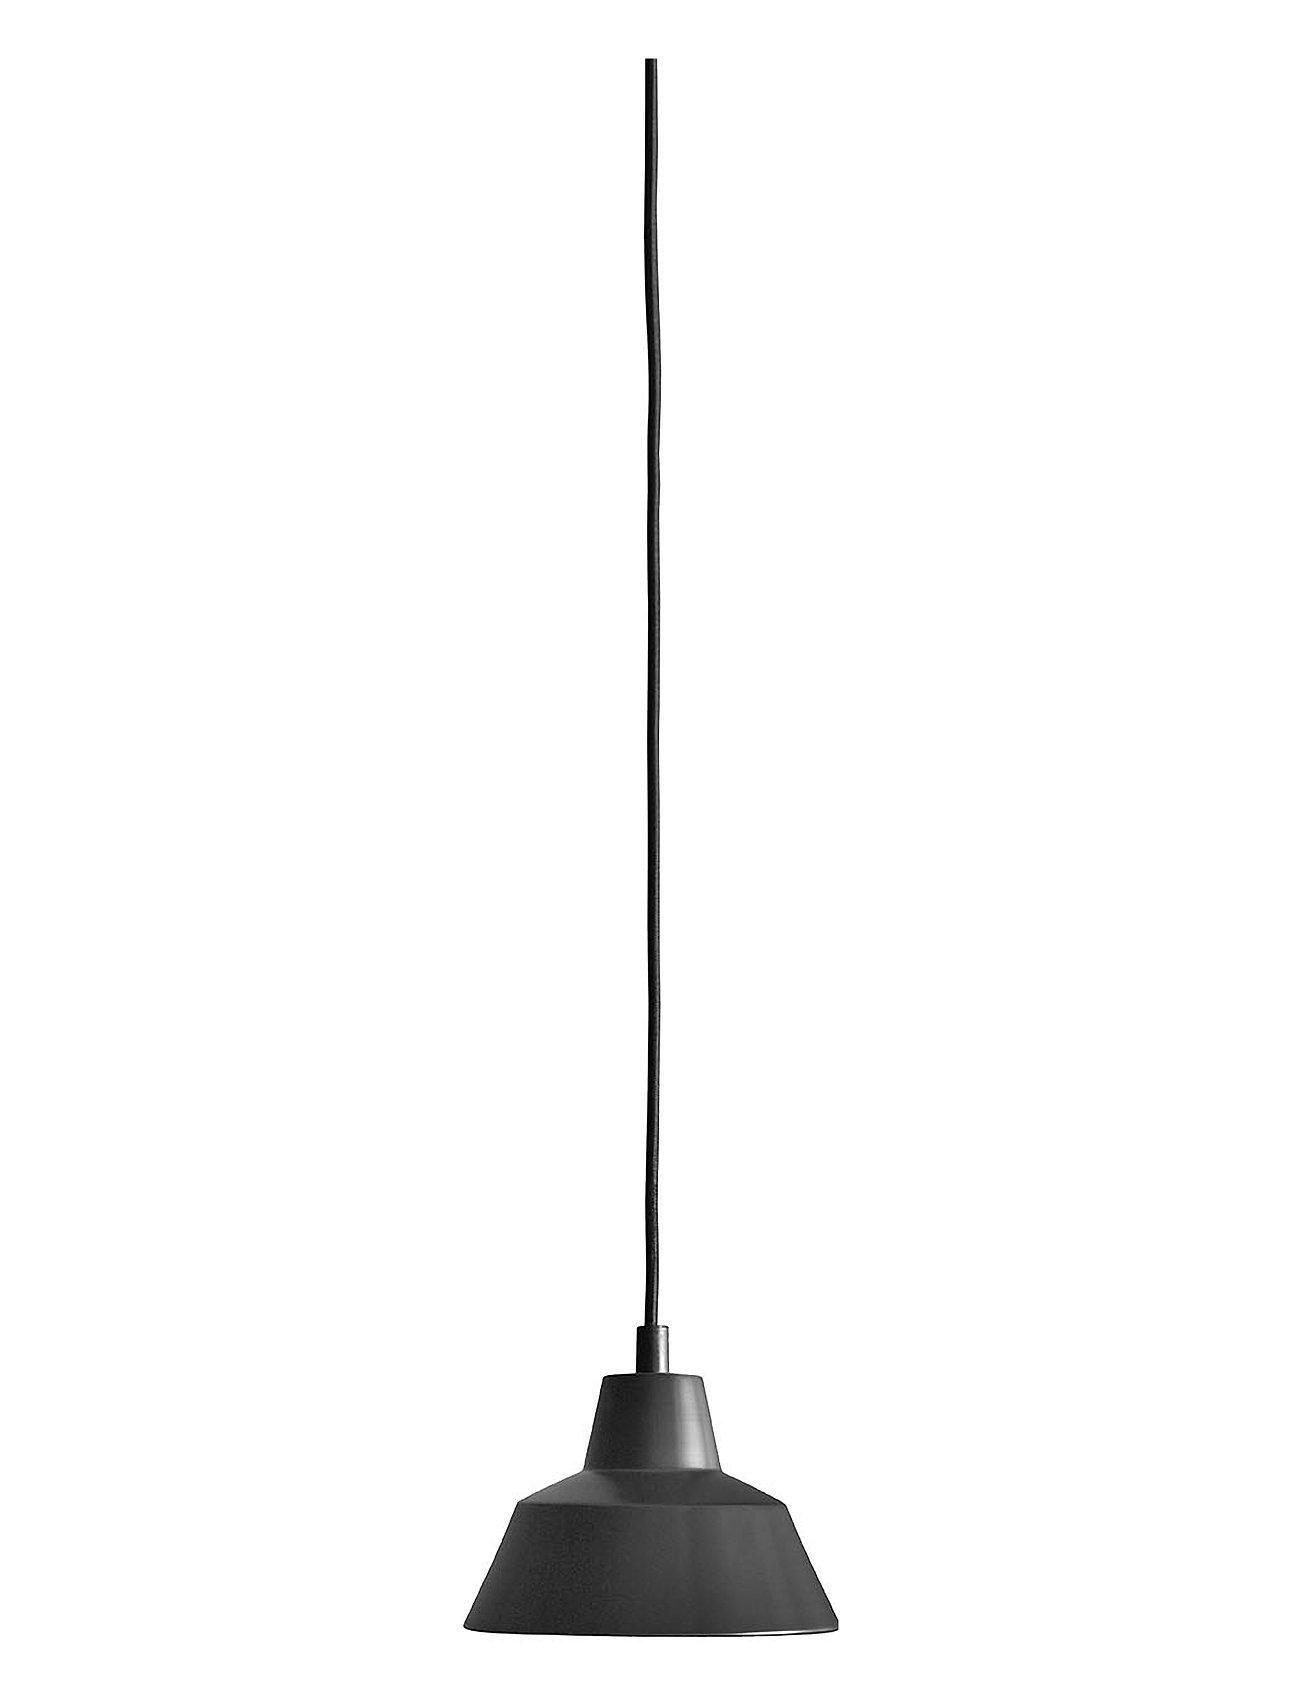 Workshop Lamp W1 Home Lighting Lamps Ceiling Lamps Pendant Lamps Black Made By Hand